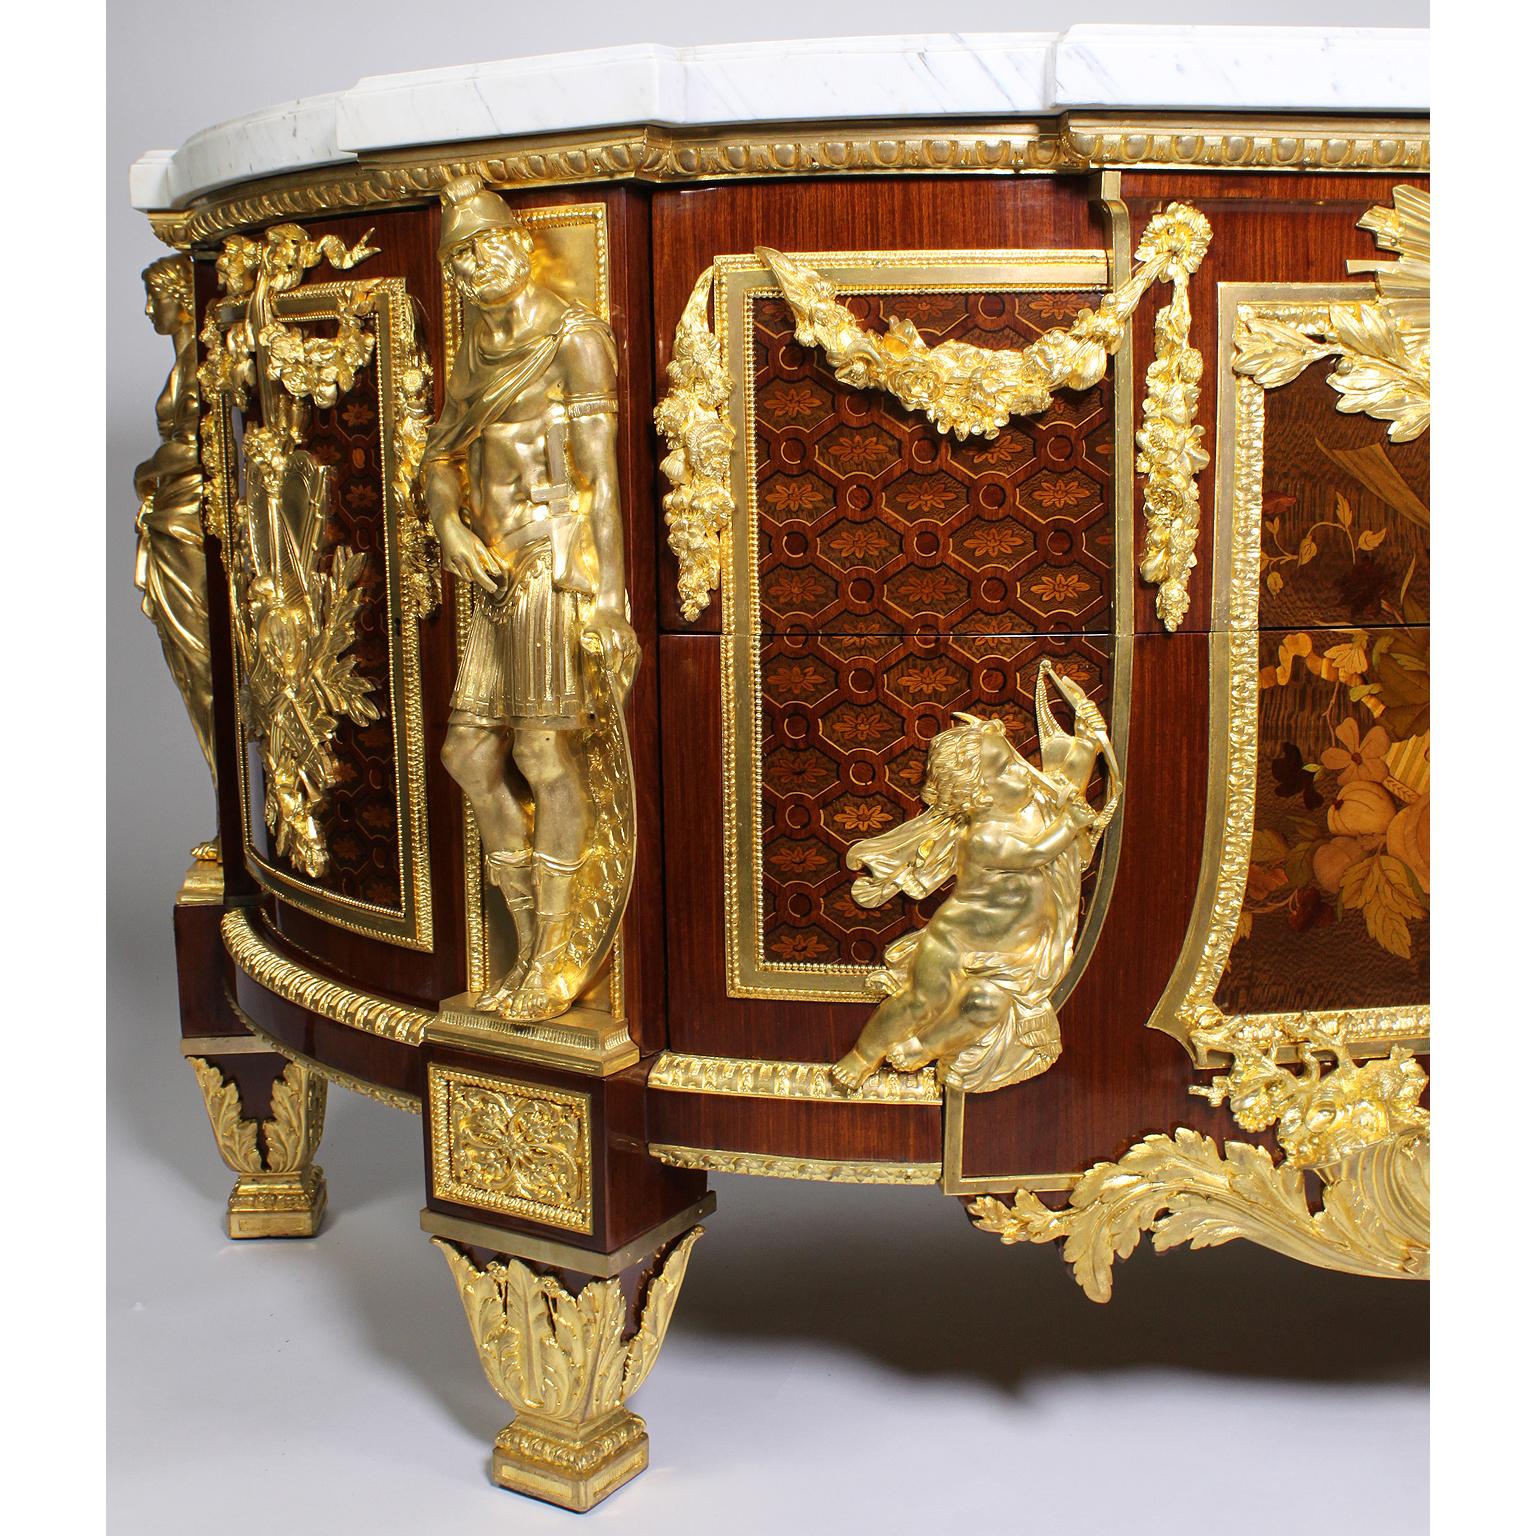 A fine and large French late 19th-20th century Louis XVI style mahogany, Kingwood Bandings and fruitwood marquetry armorial commode with Sycamore Marquertry and gilt bronze mounts, after a Model of The Commode Commandée Pour La Chambre de Louis XVI